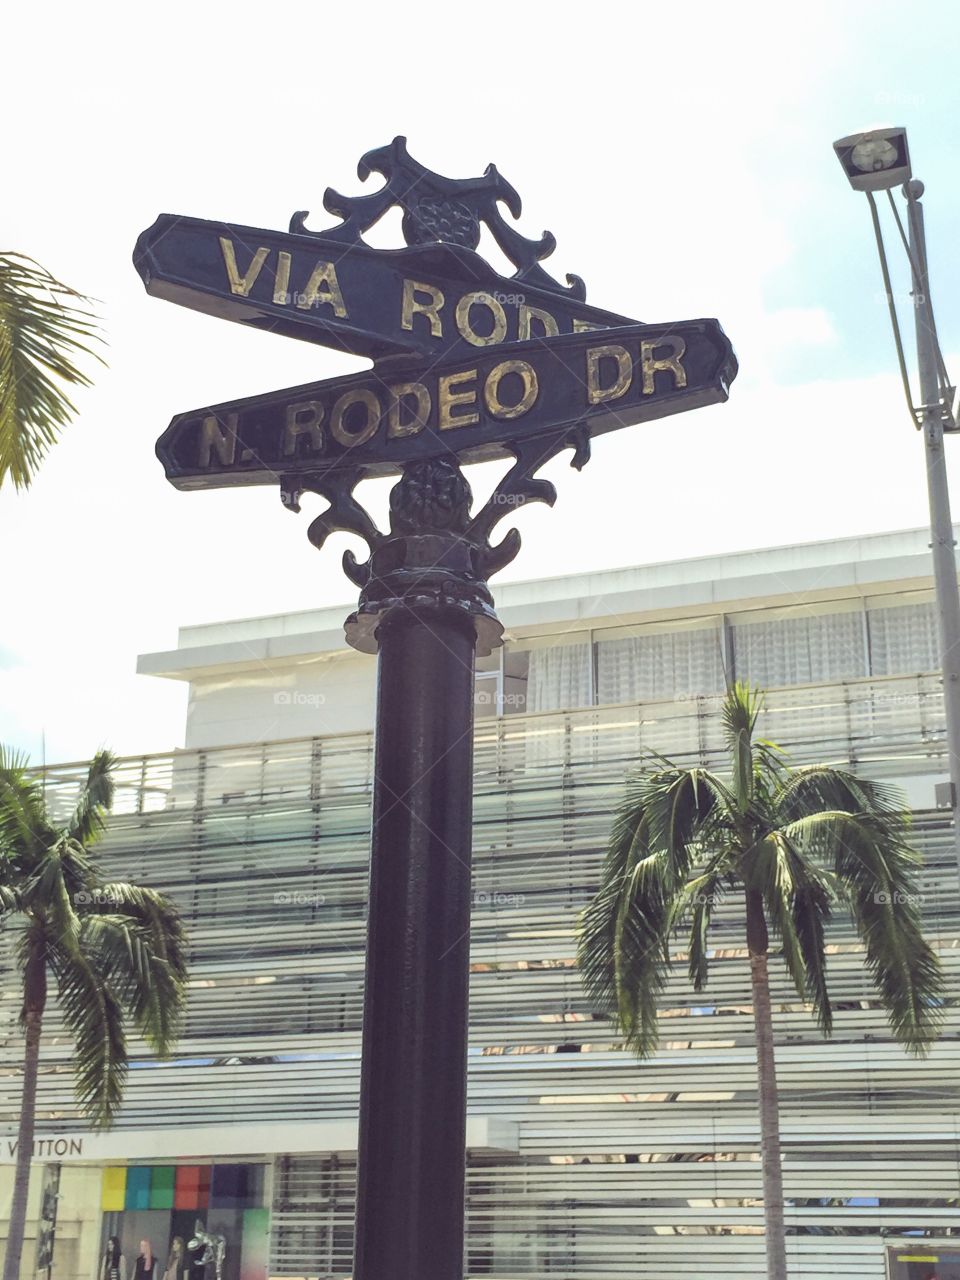 Close Up Of The Famous Rodeo Dr Sign Located In Los Angeles, California